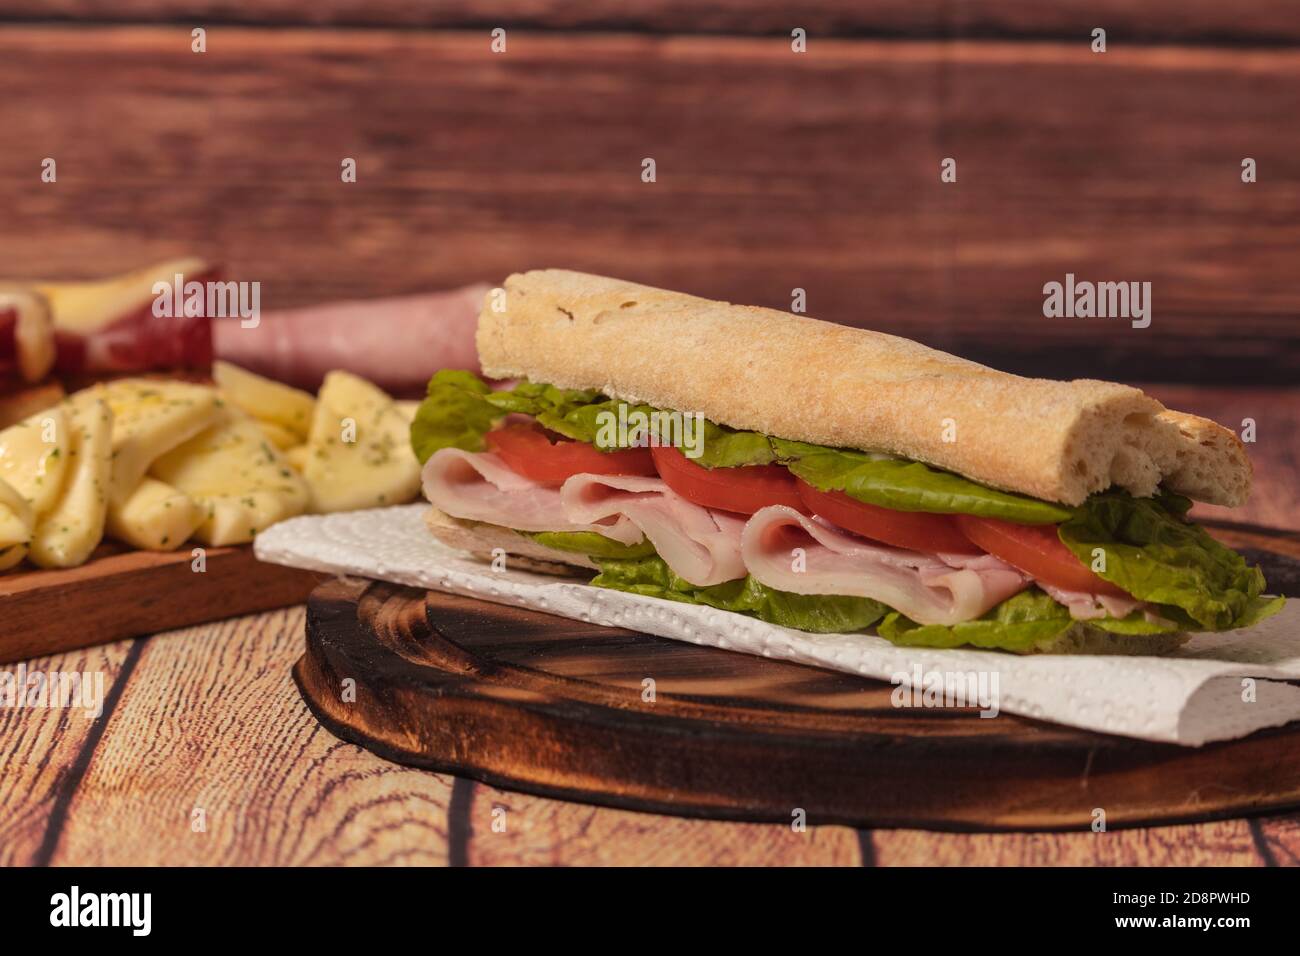 Ham, tomato and lettuce sandwich on a wooden plate on a rustic background Stock Photo